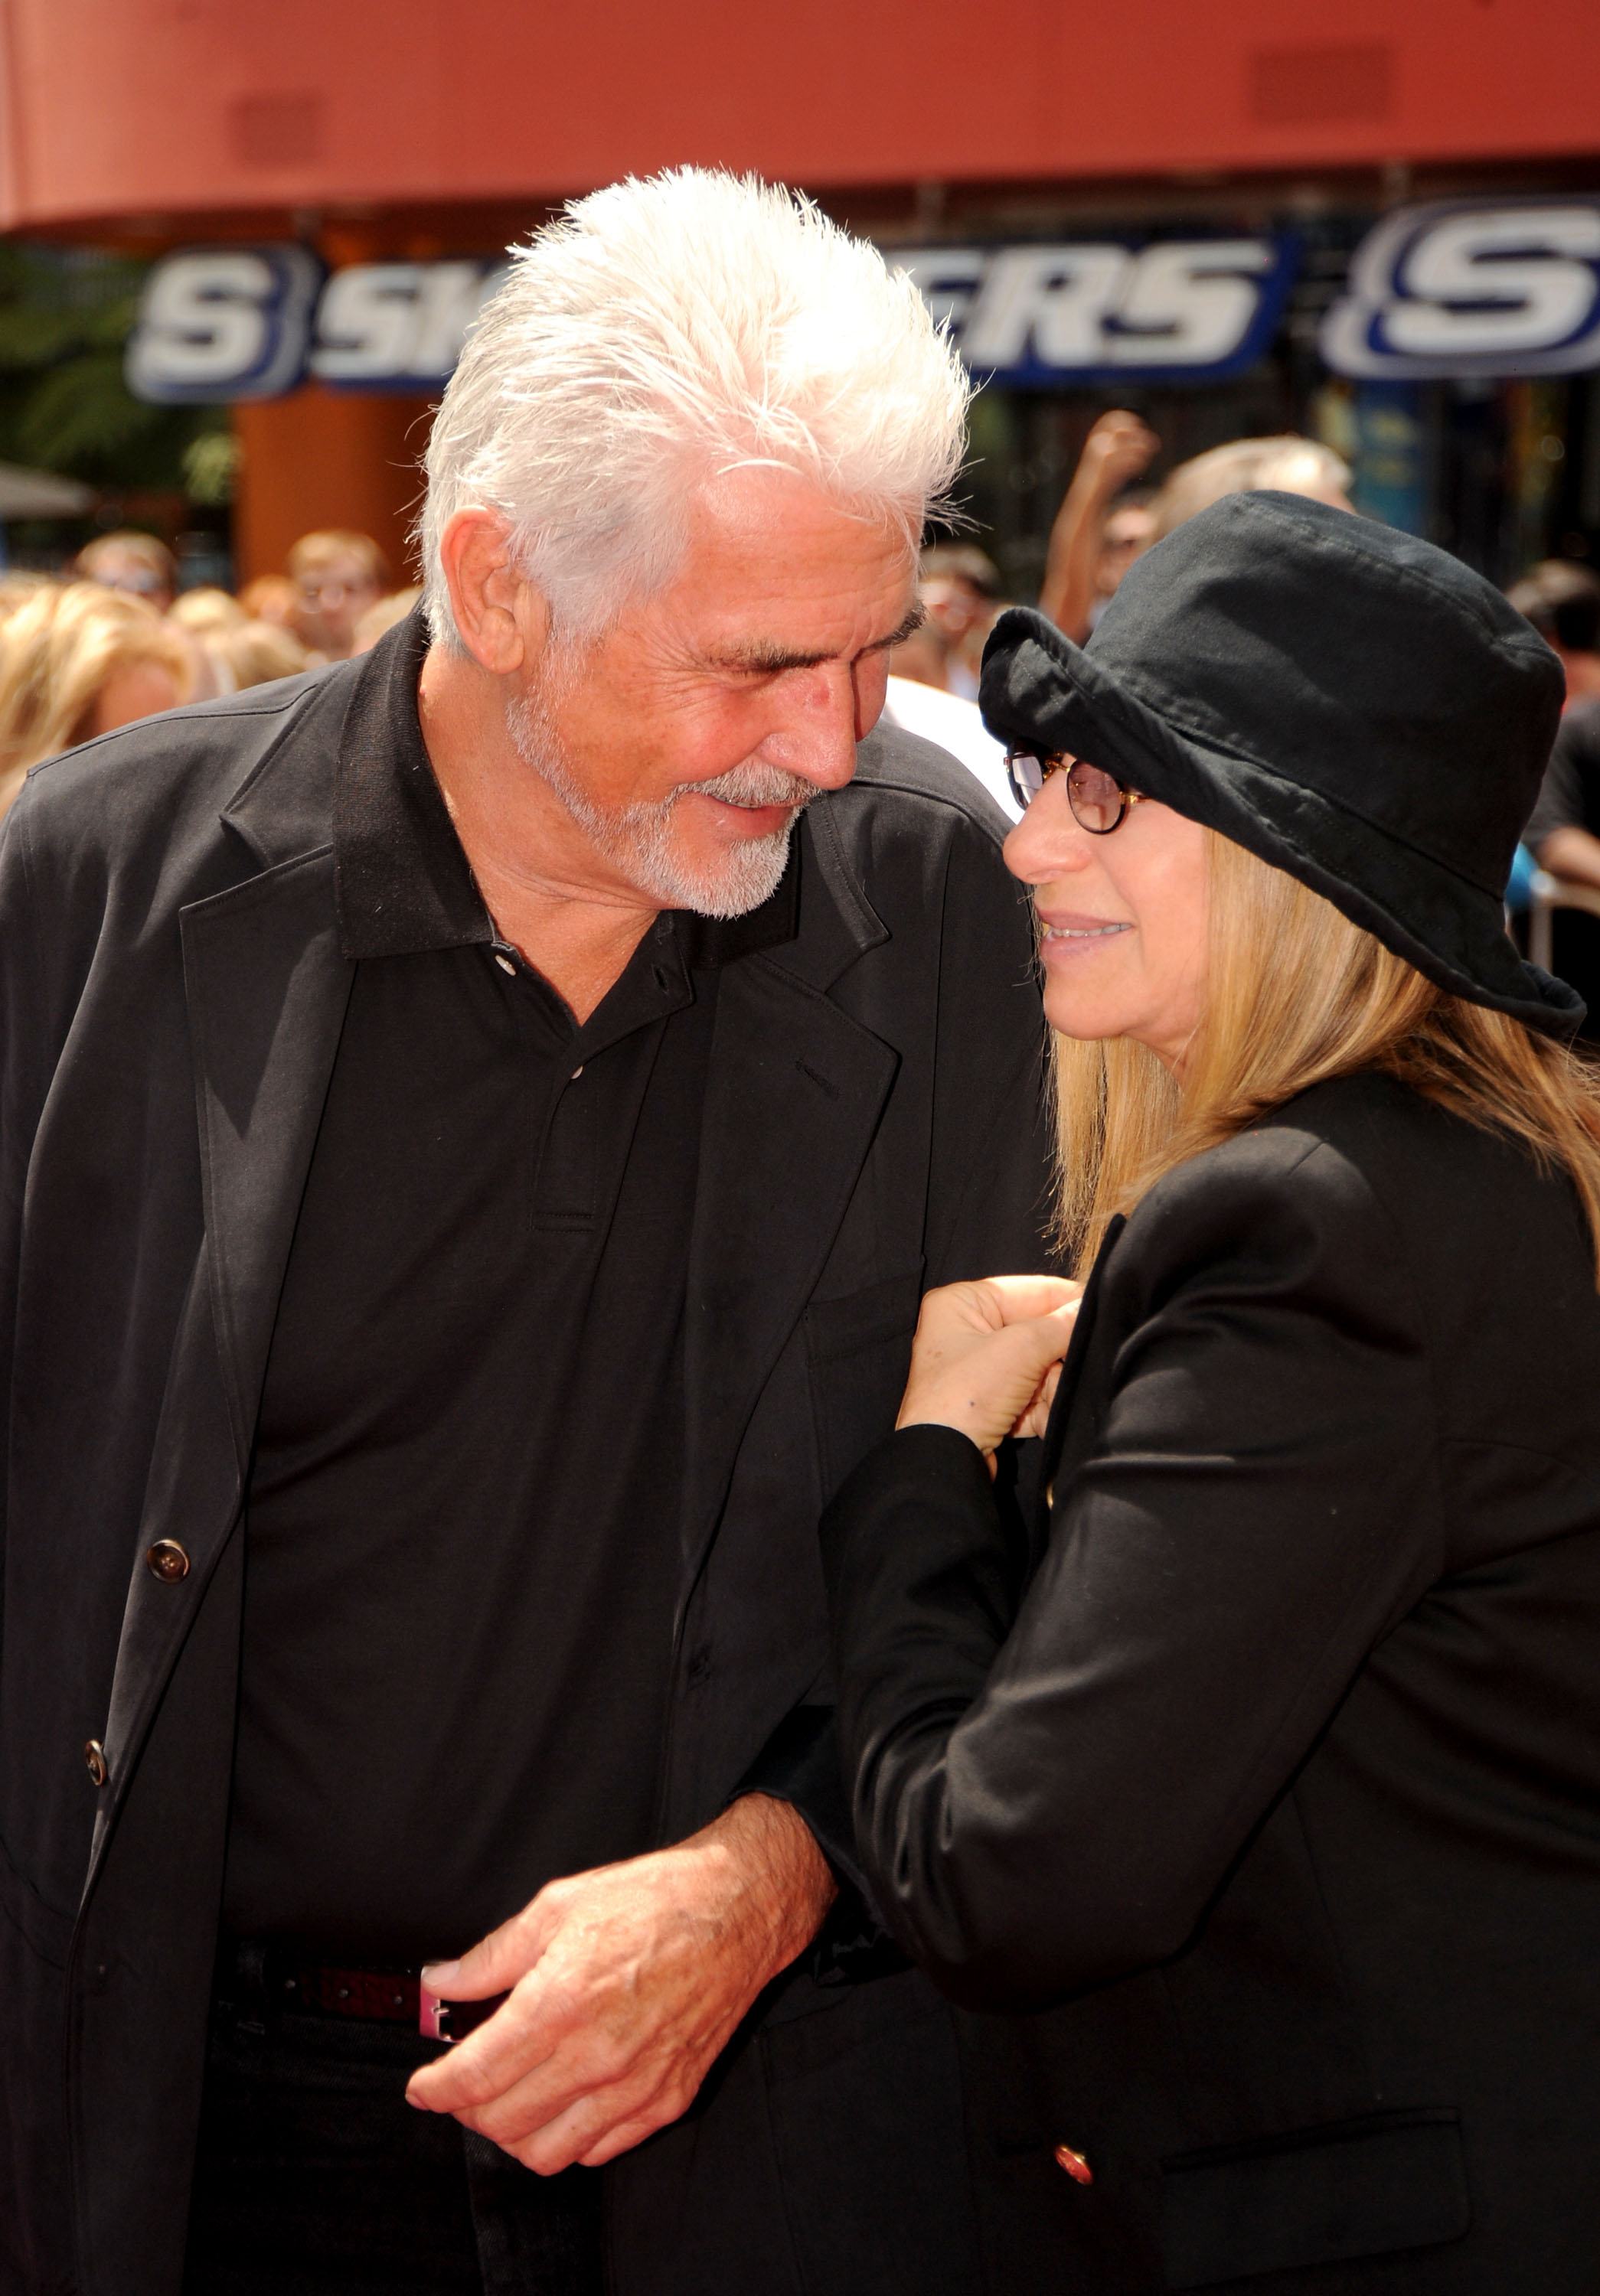 James Brolin and Barbra Streisand on July 10, 2010 in Universal City, California. | Source: Getty Images